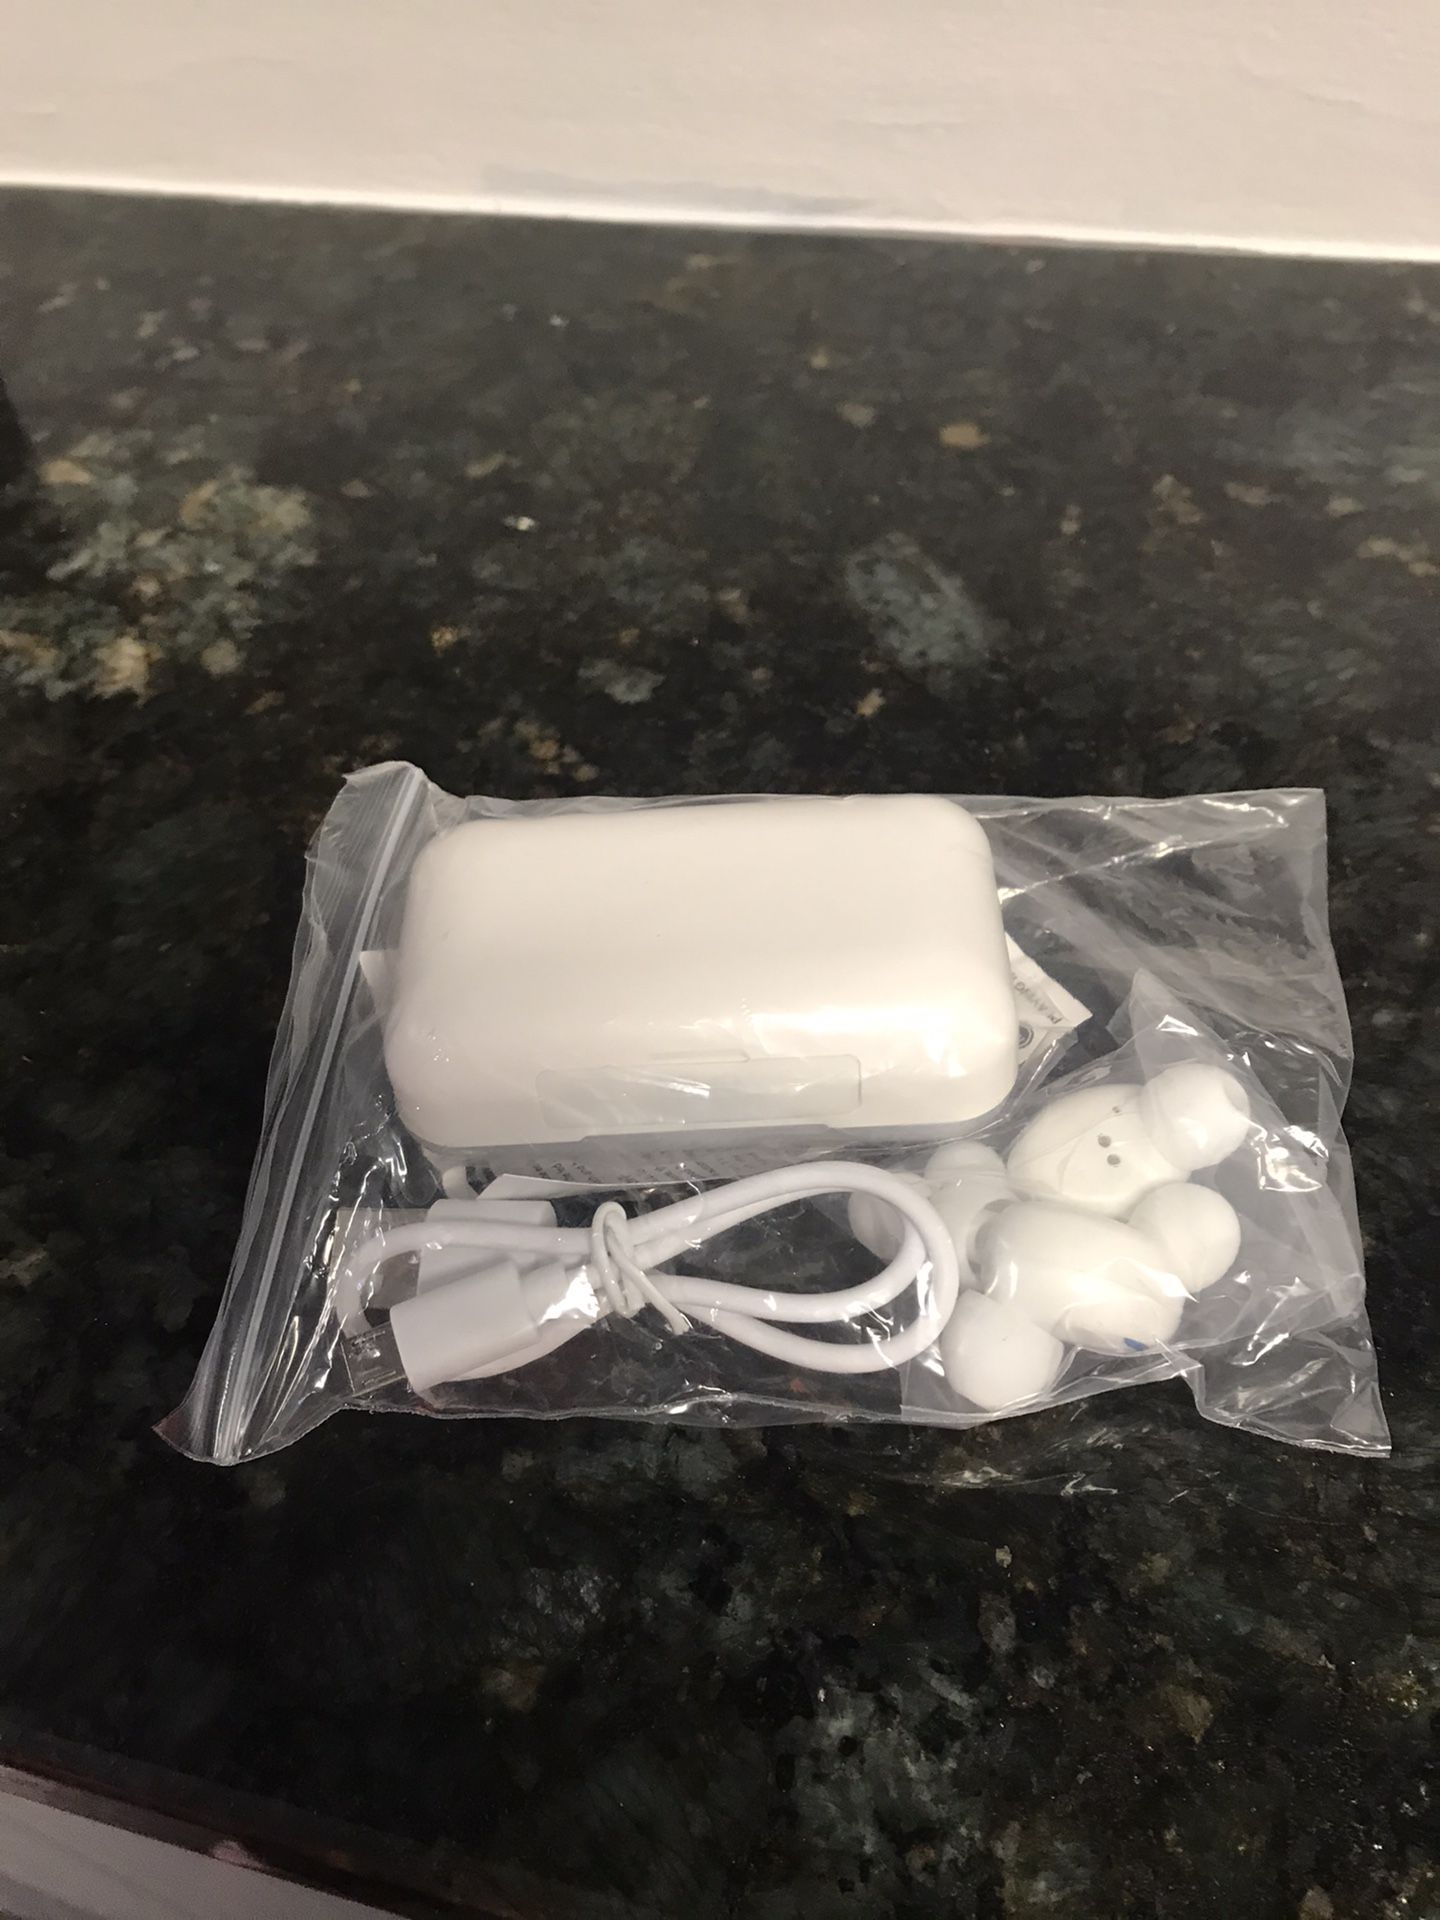 New wireless earbuds with charging case